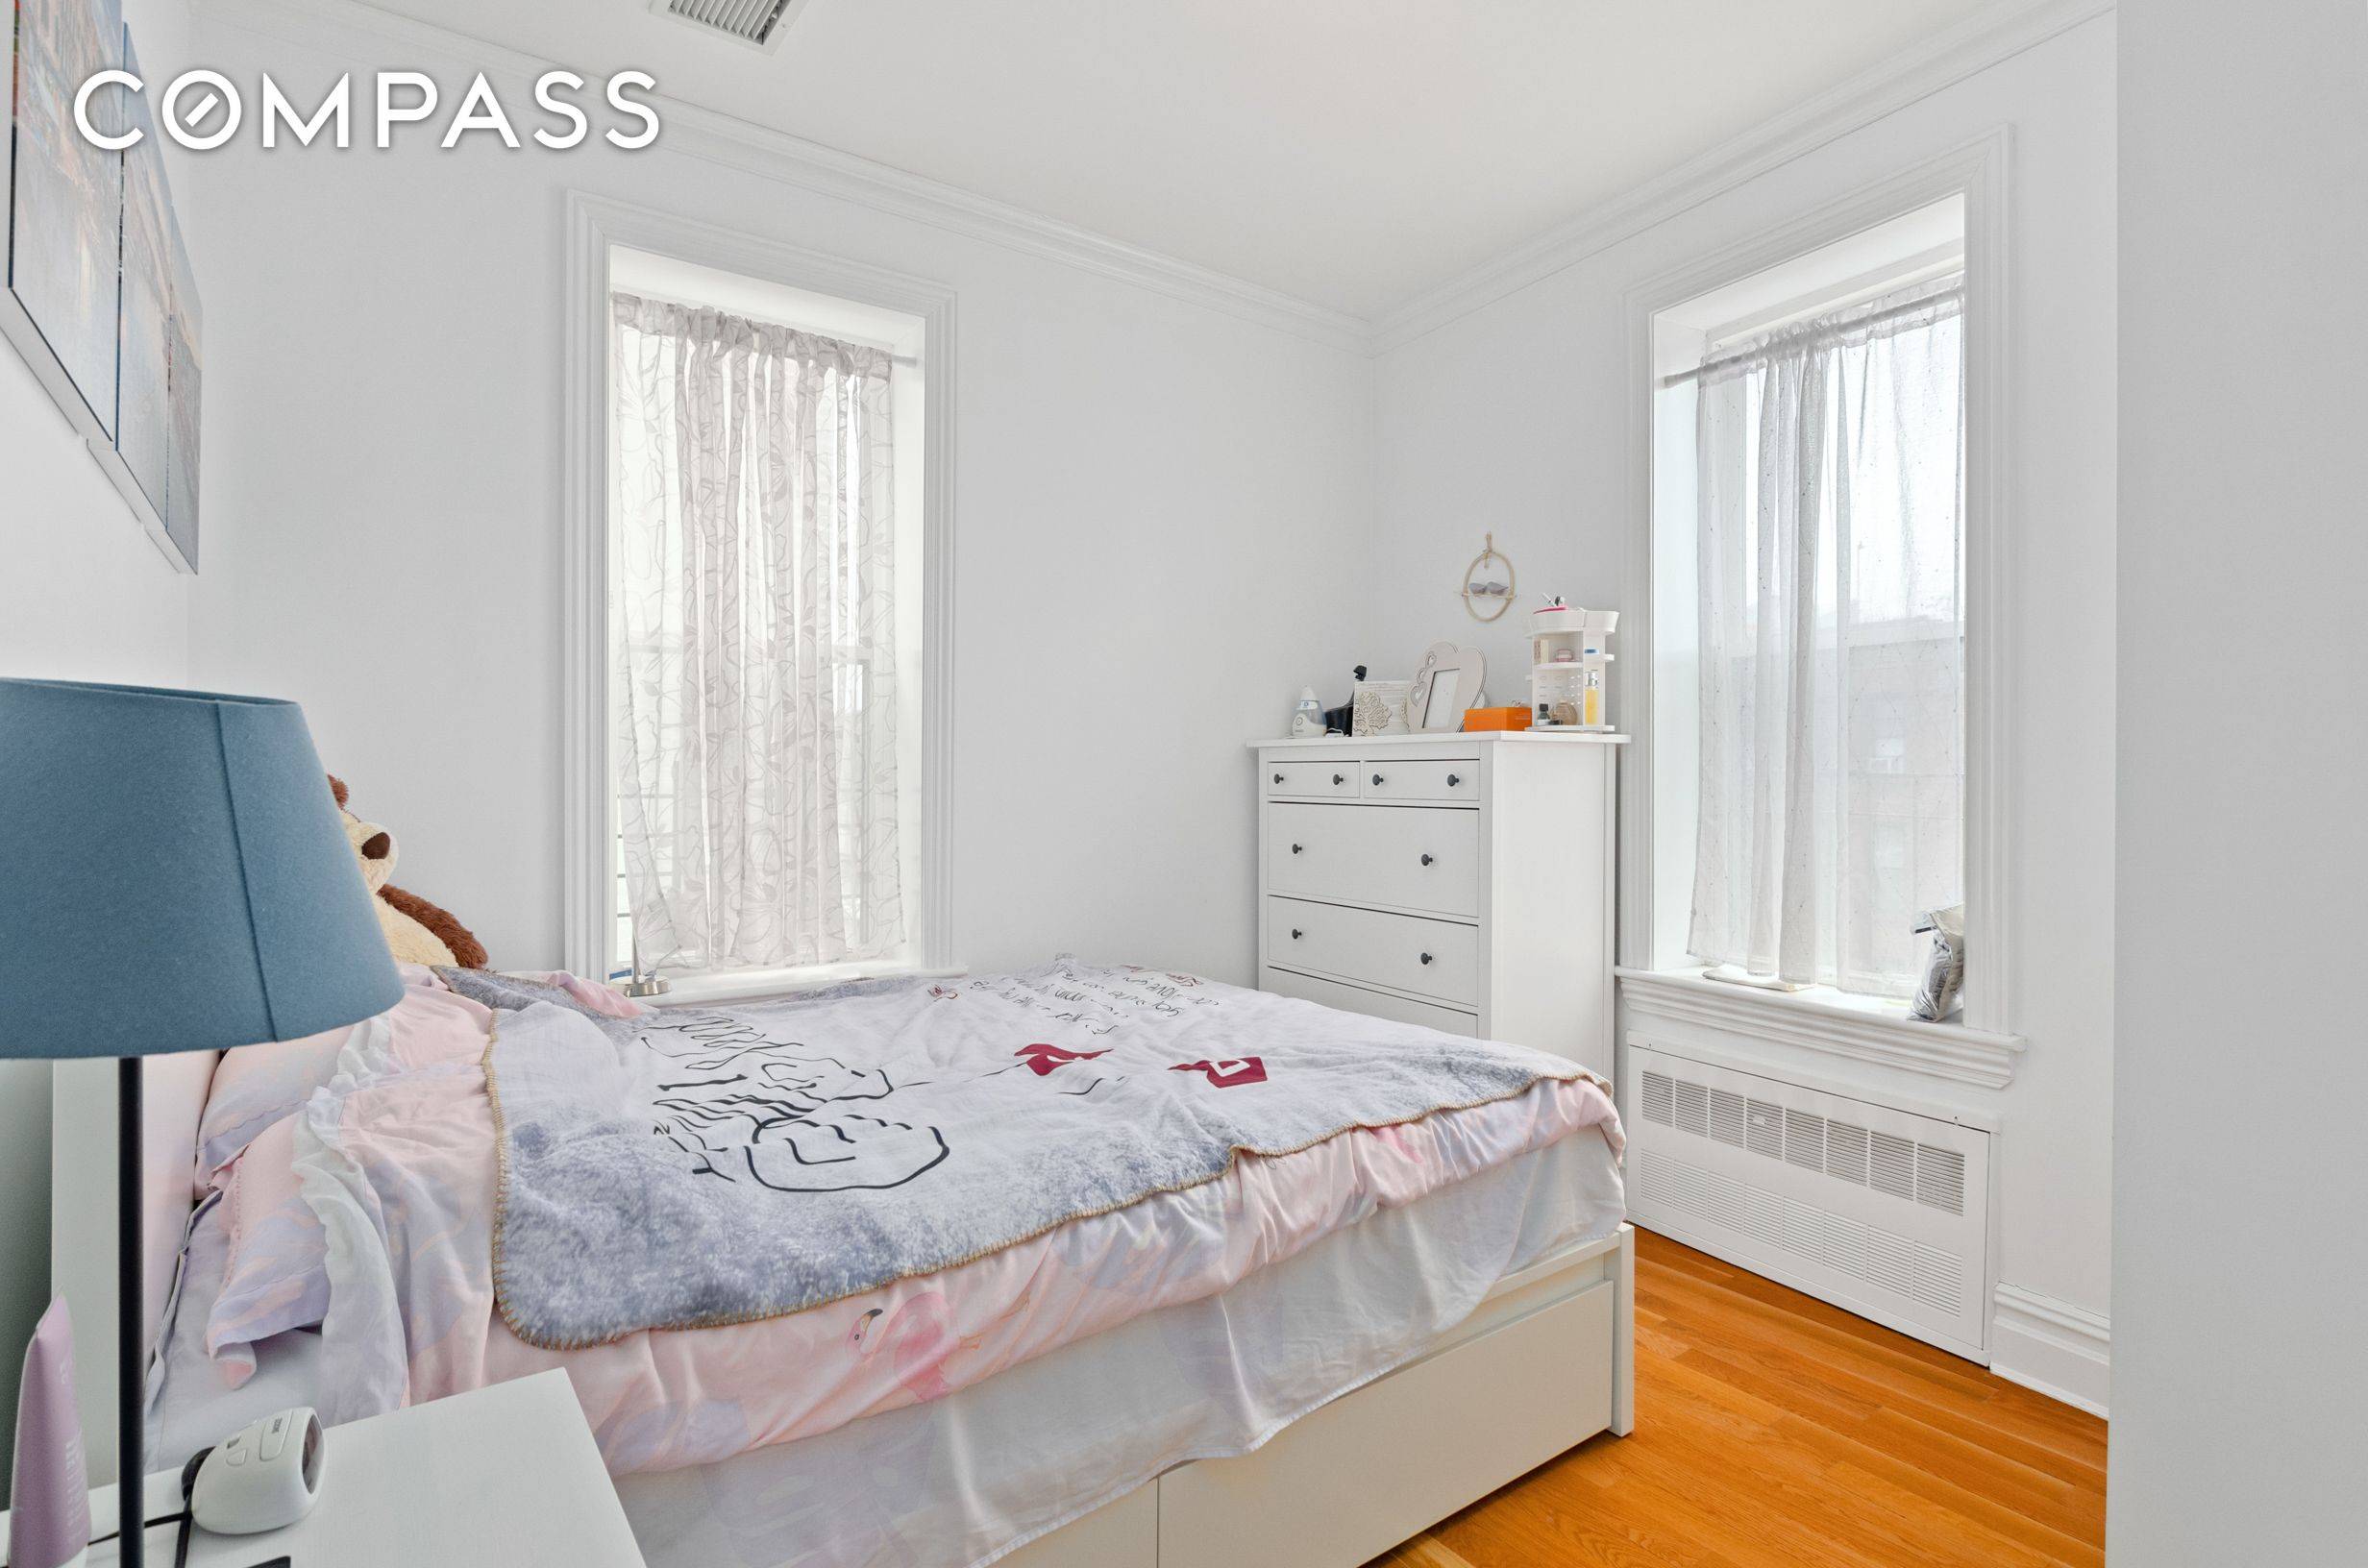 Luxuriously Renovated 2 Bedroom W D In Unit Three Blocks from Prospect Park This gorgeous 2BR 1BA will allure you with its luxurious renovations, excellent layout and bright natural light.